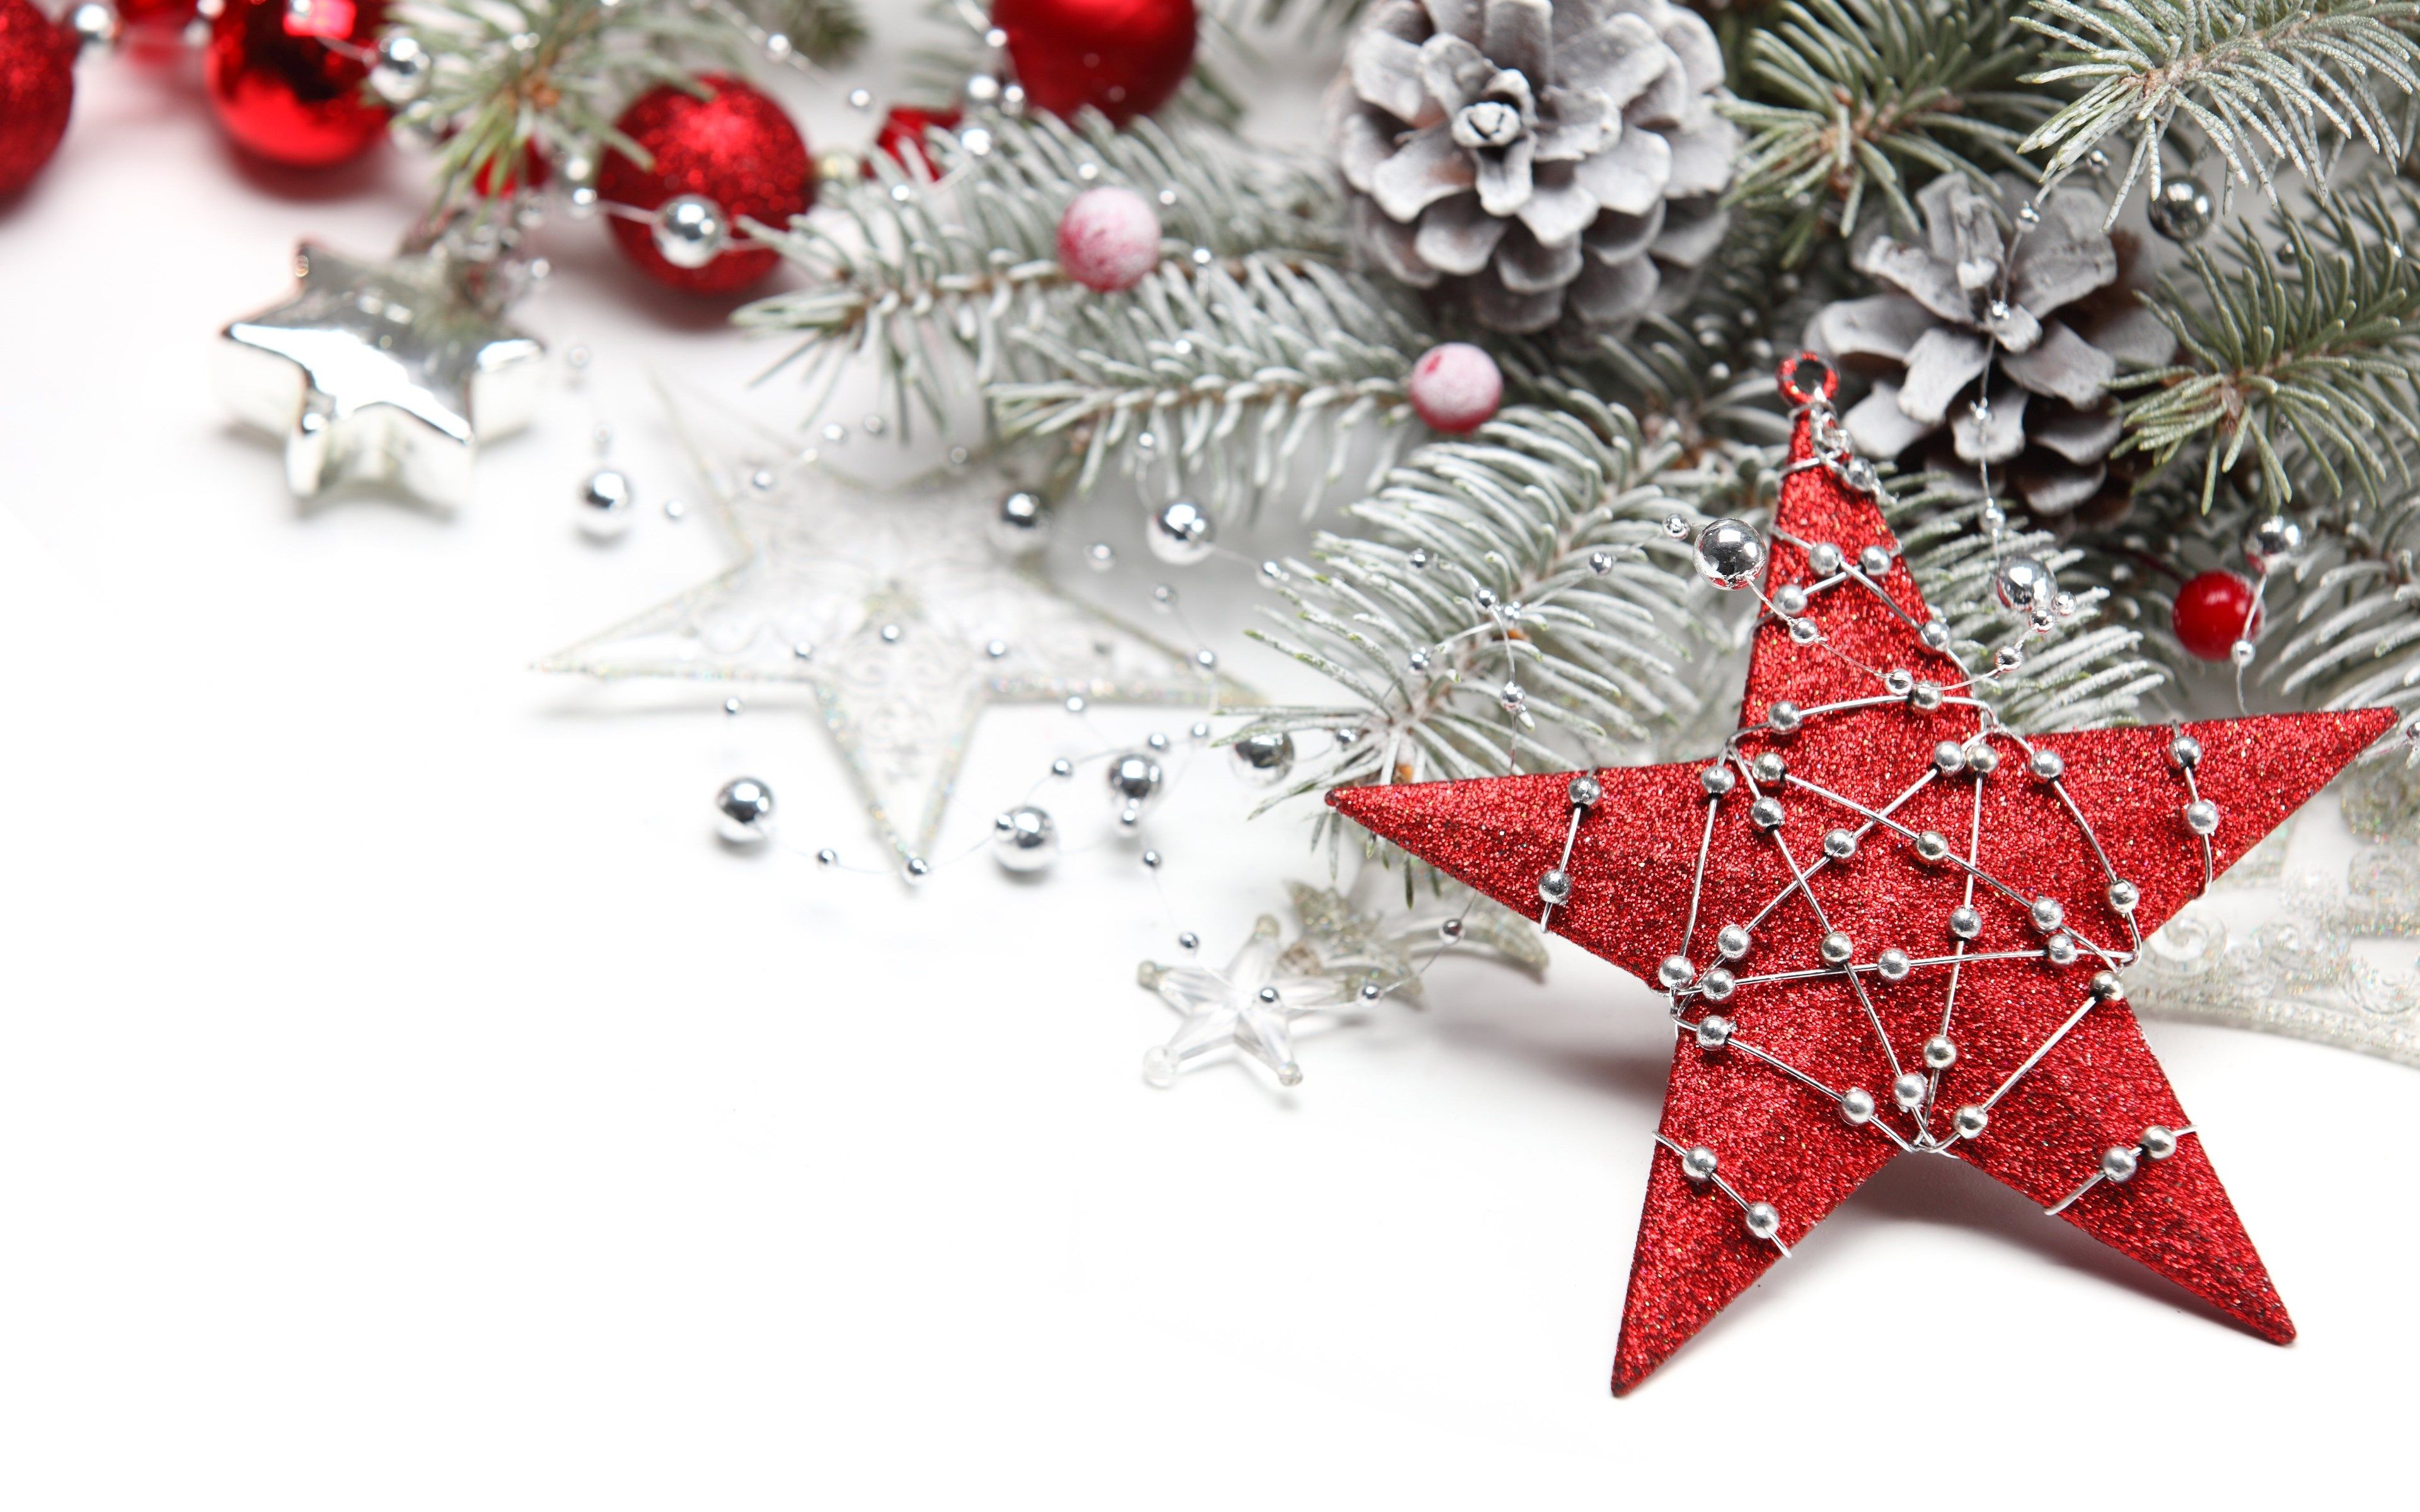 Christmas Star For The Christmas Tree Wallpaper And Image. Desktop Background